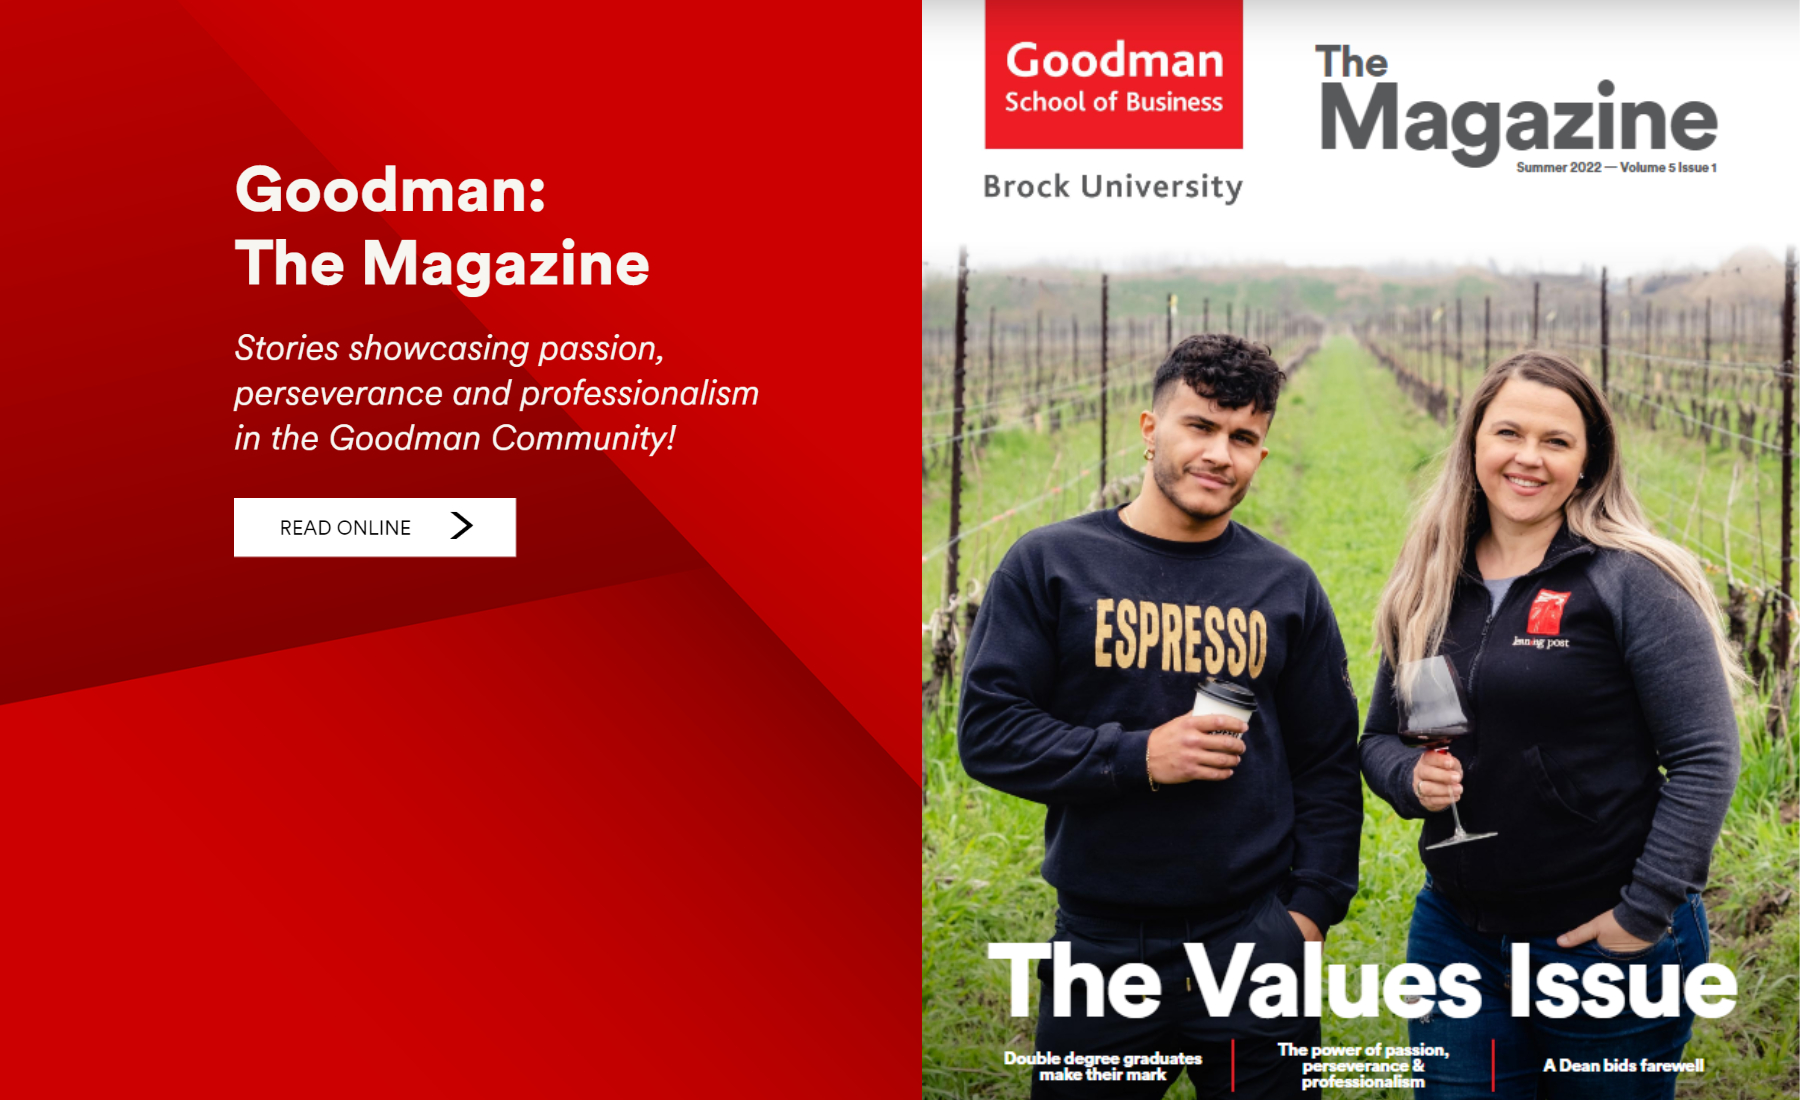 Goodman the magazine, stories showcasing passion, perseverance and professionalism 